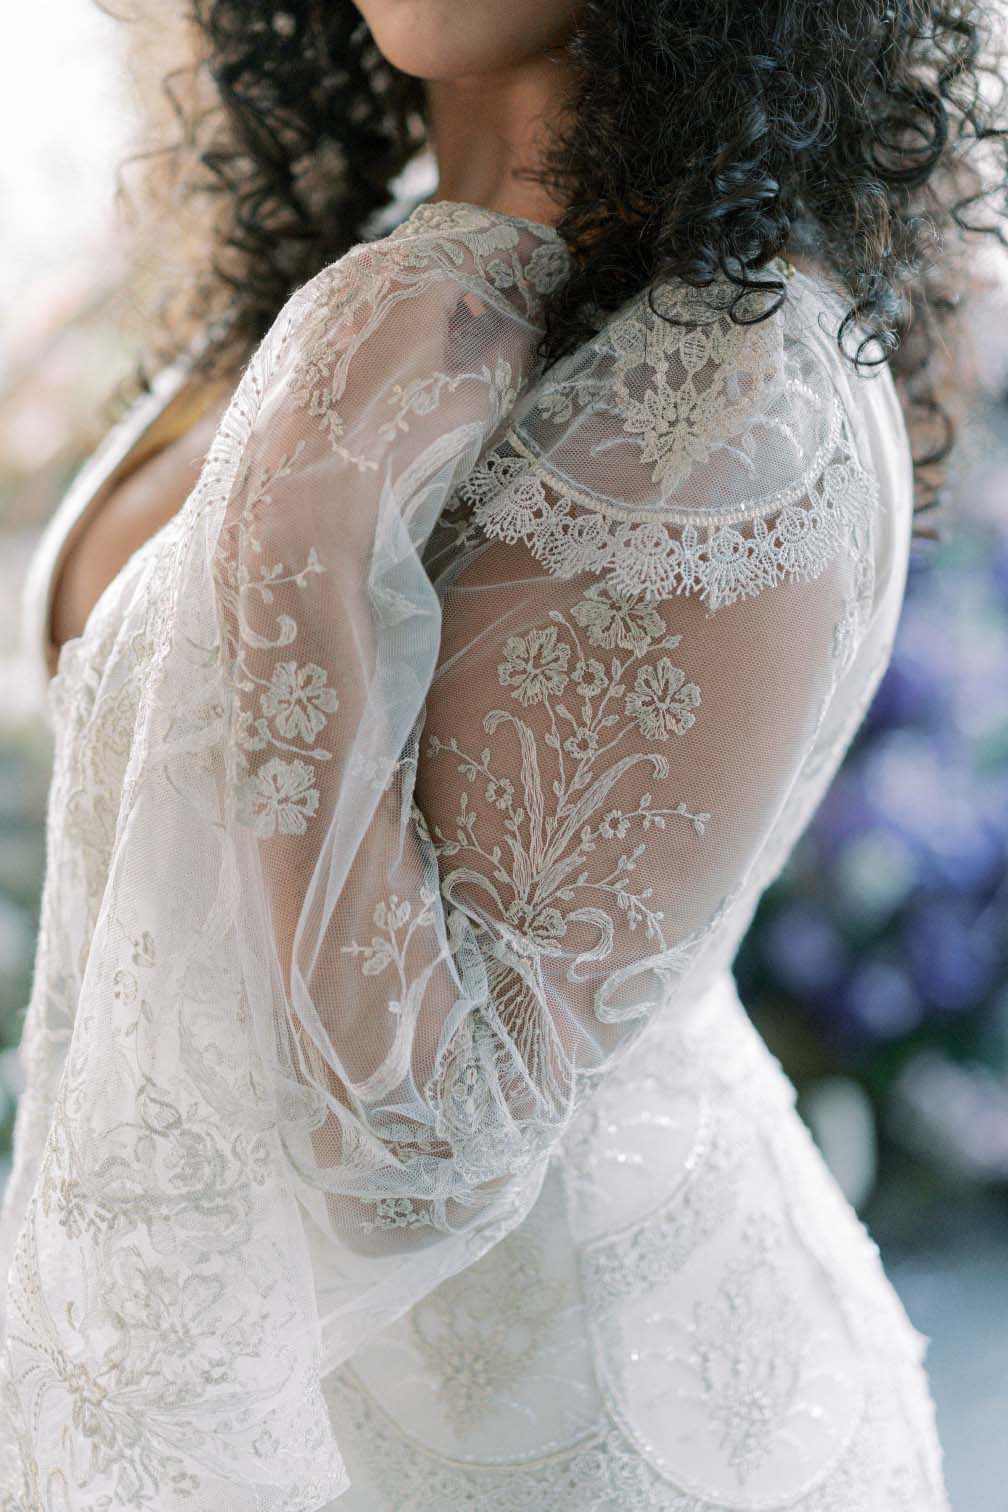 Gold Embroidered Wedding Dress Filligree by Claire Pettibone